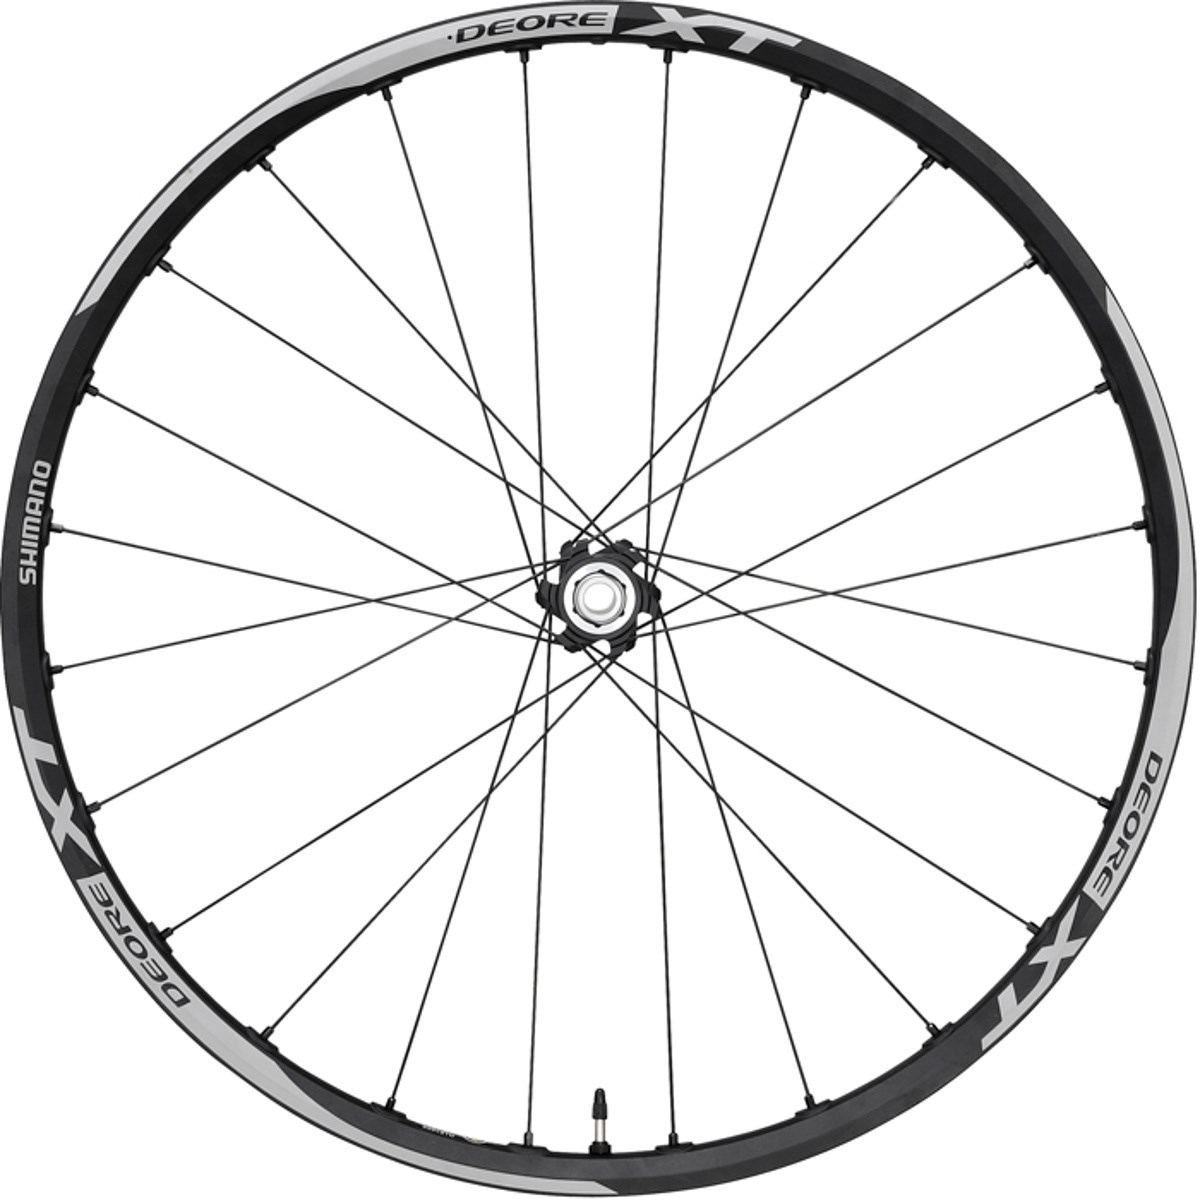 Shimano Deore XT Disc Front Wheel with 15mm Axle product image